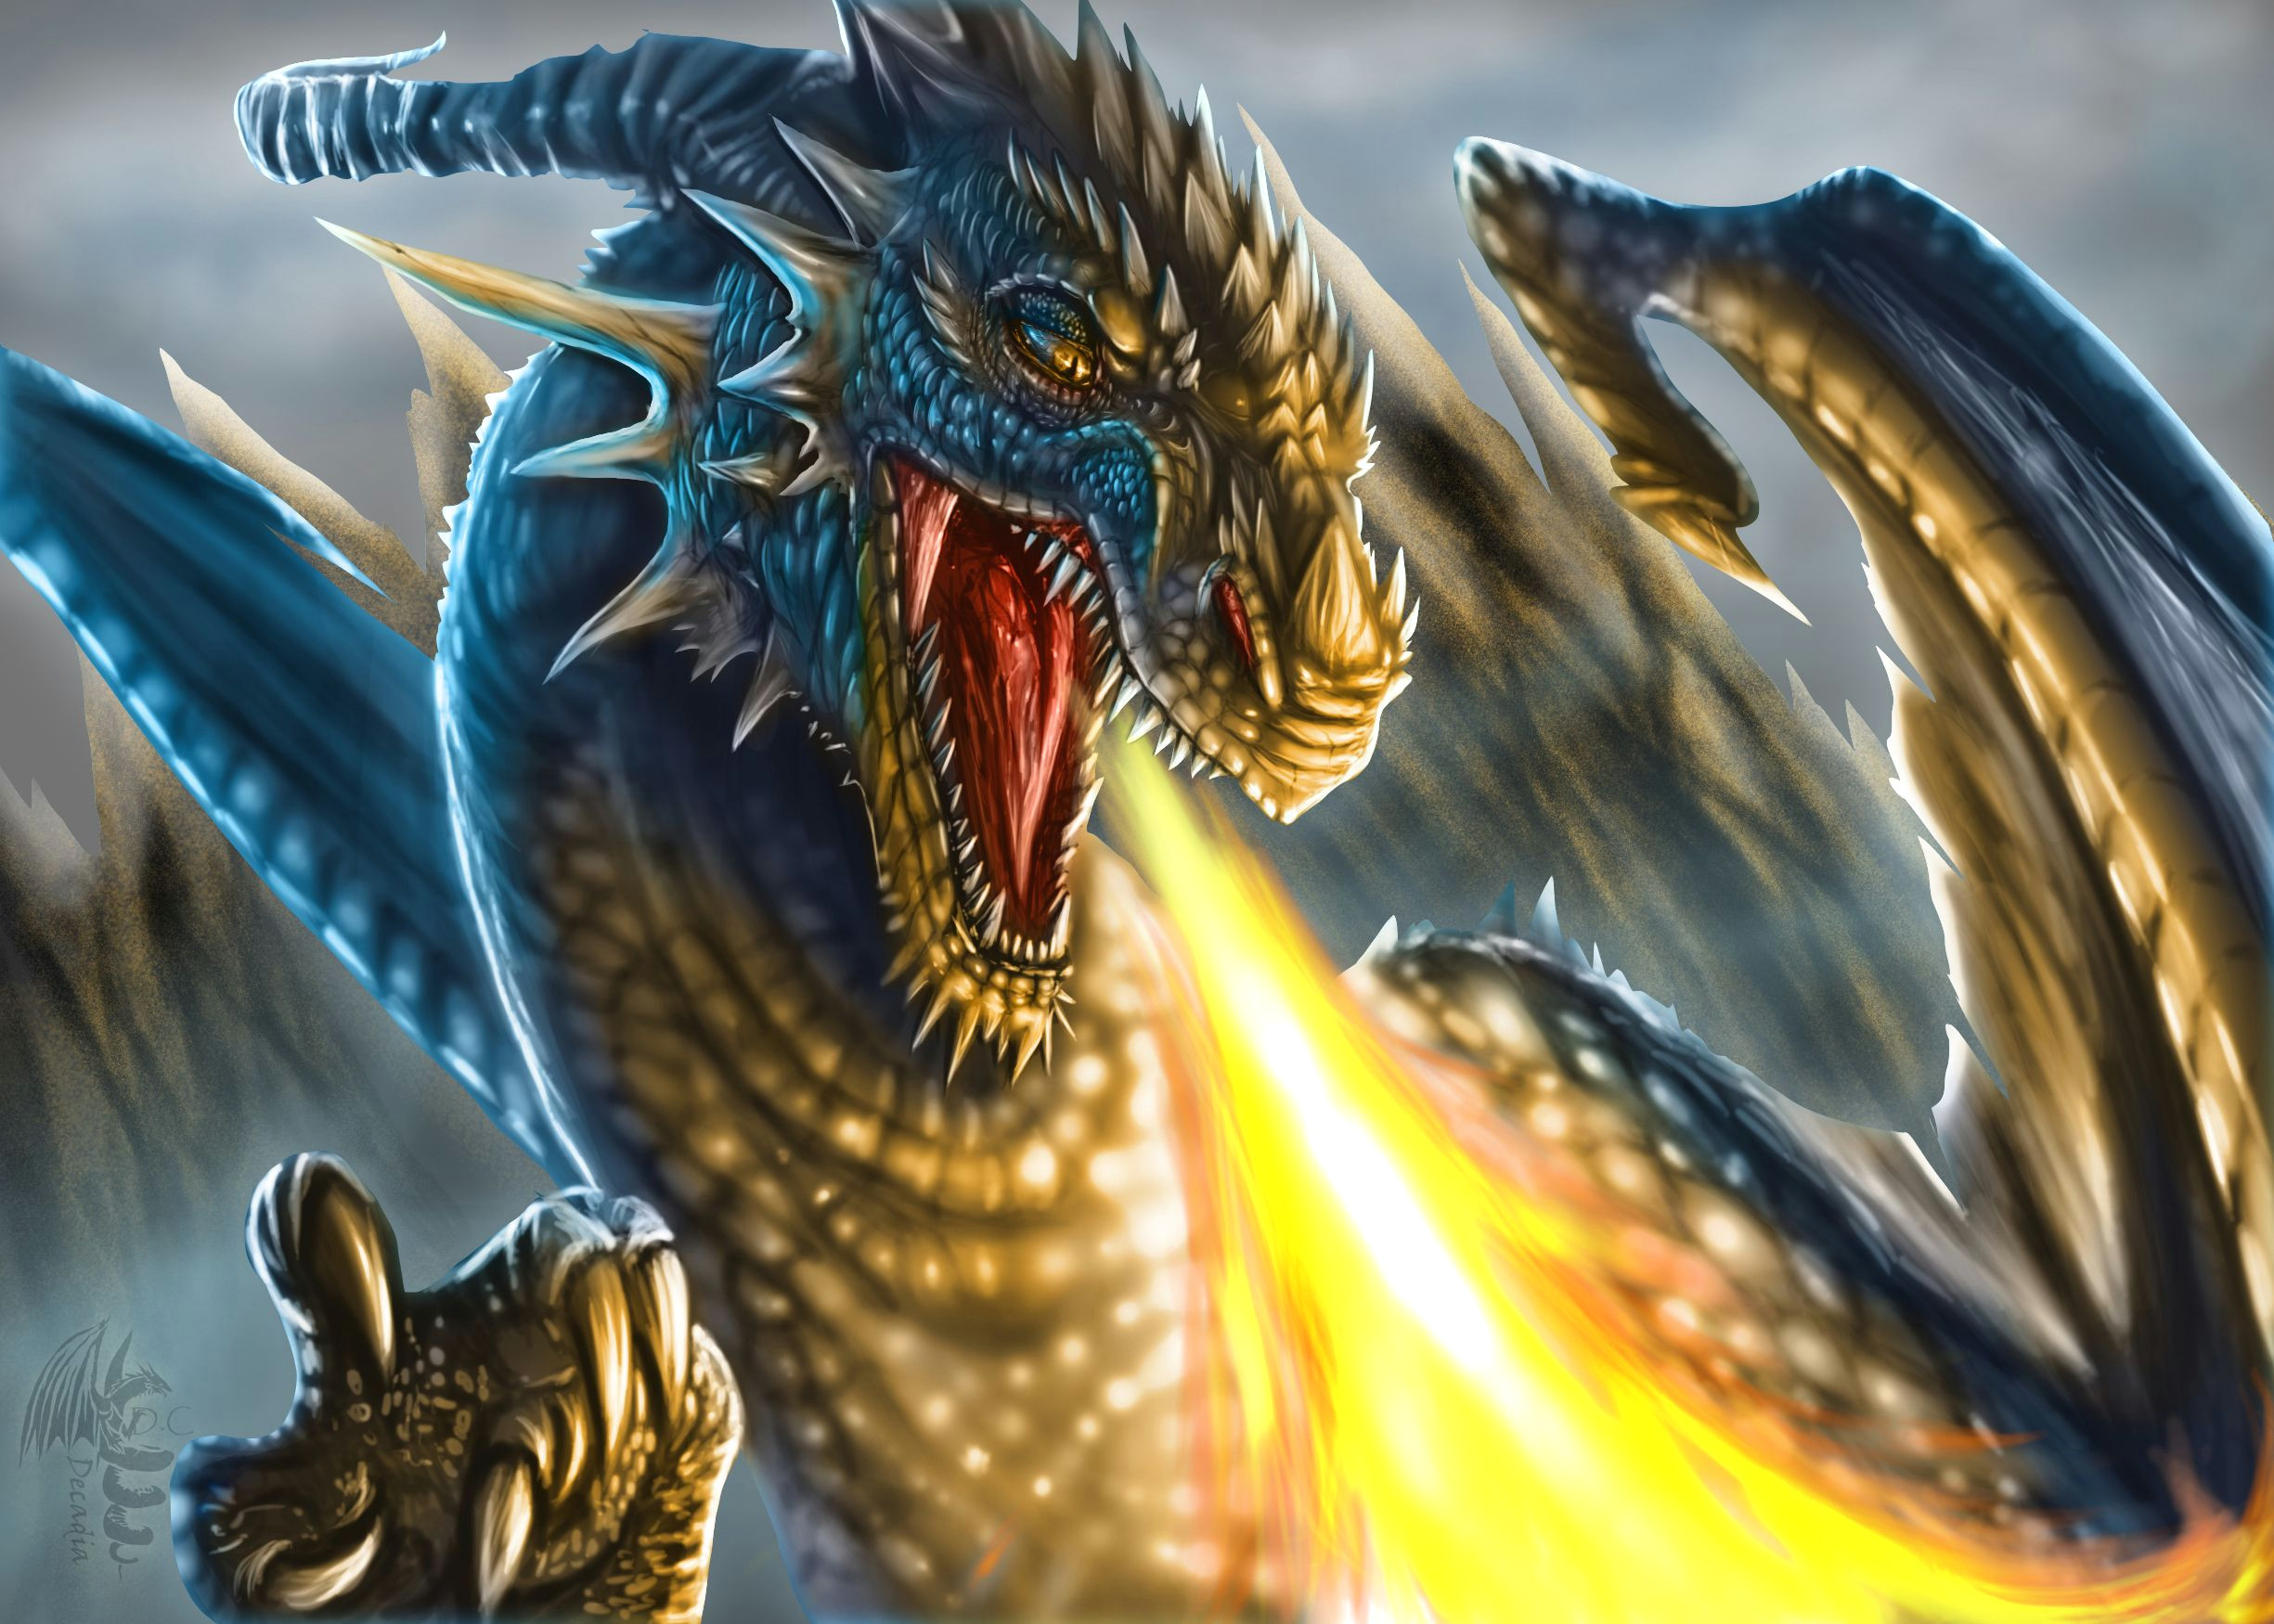 Drawings Of Dragons Breathing Fire Angry Fire Breath Dragon Wallpaper Download to Mobile Phone